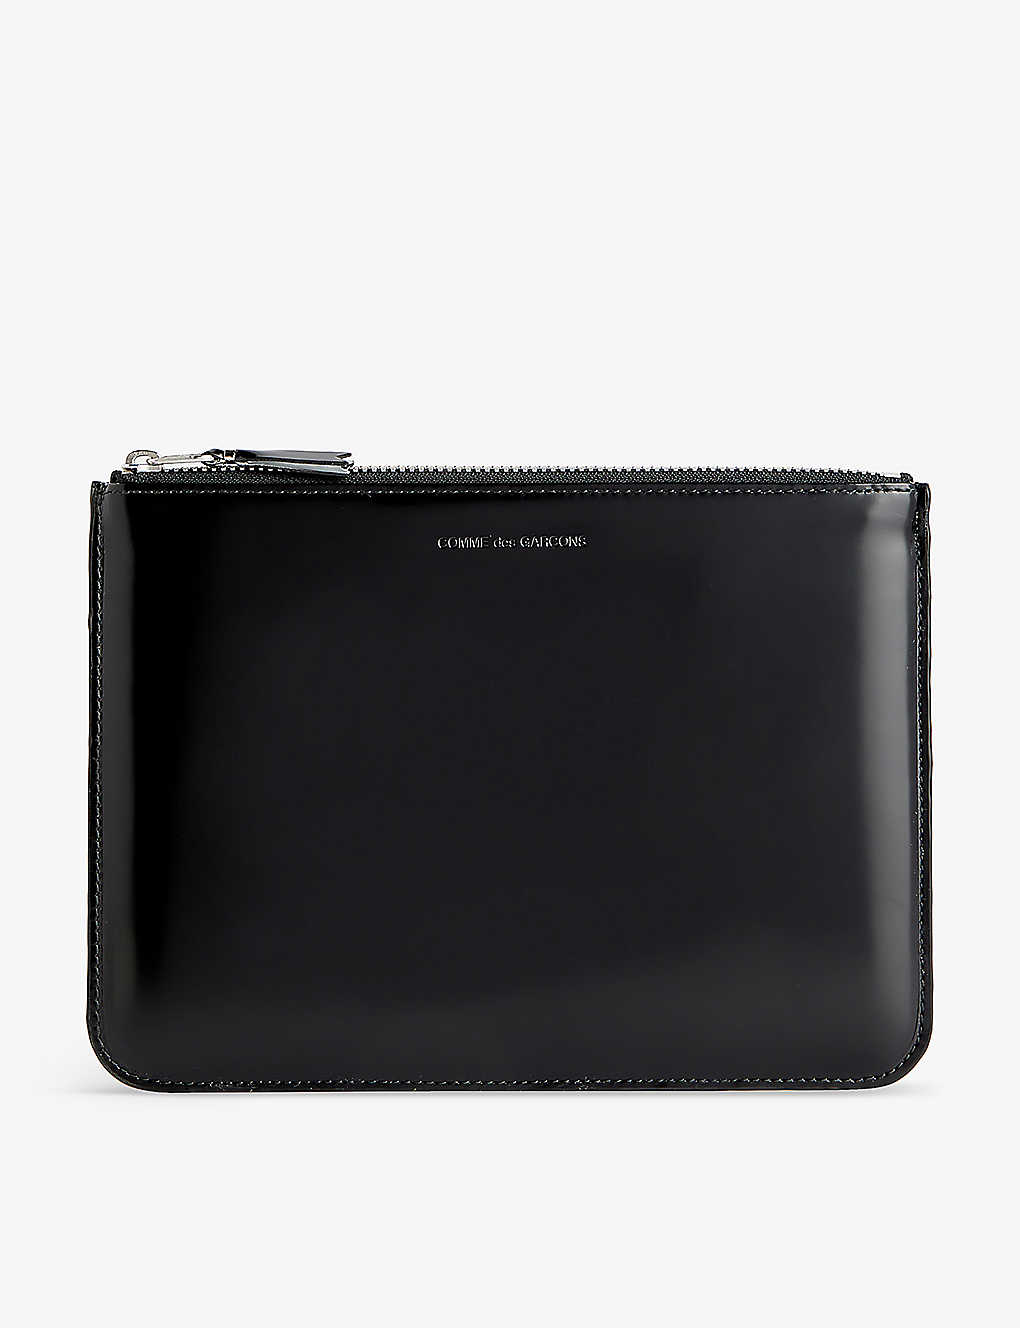 Comme Des Garçons Brand-embossed Rectangular Leather Pouch In Black / Silver